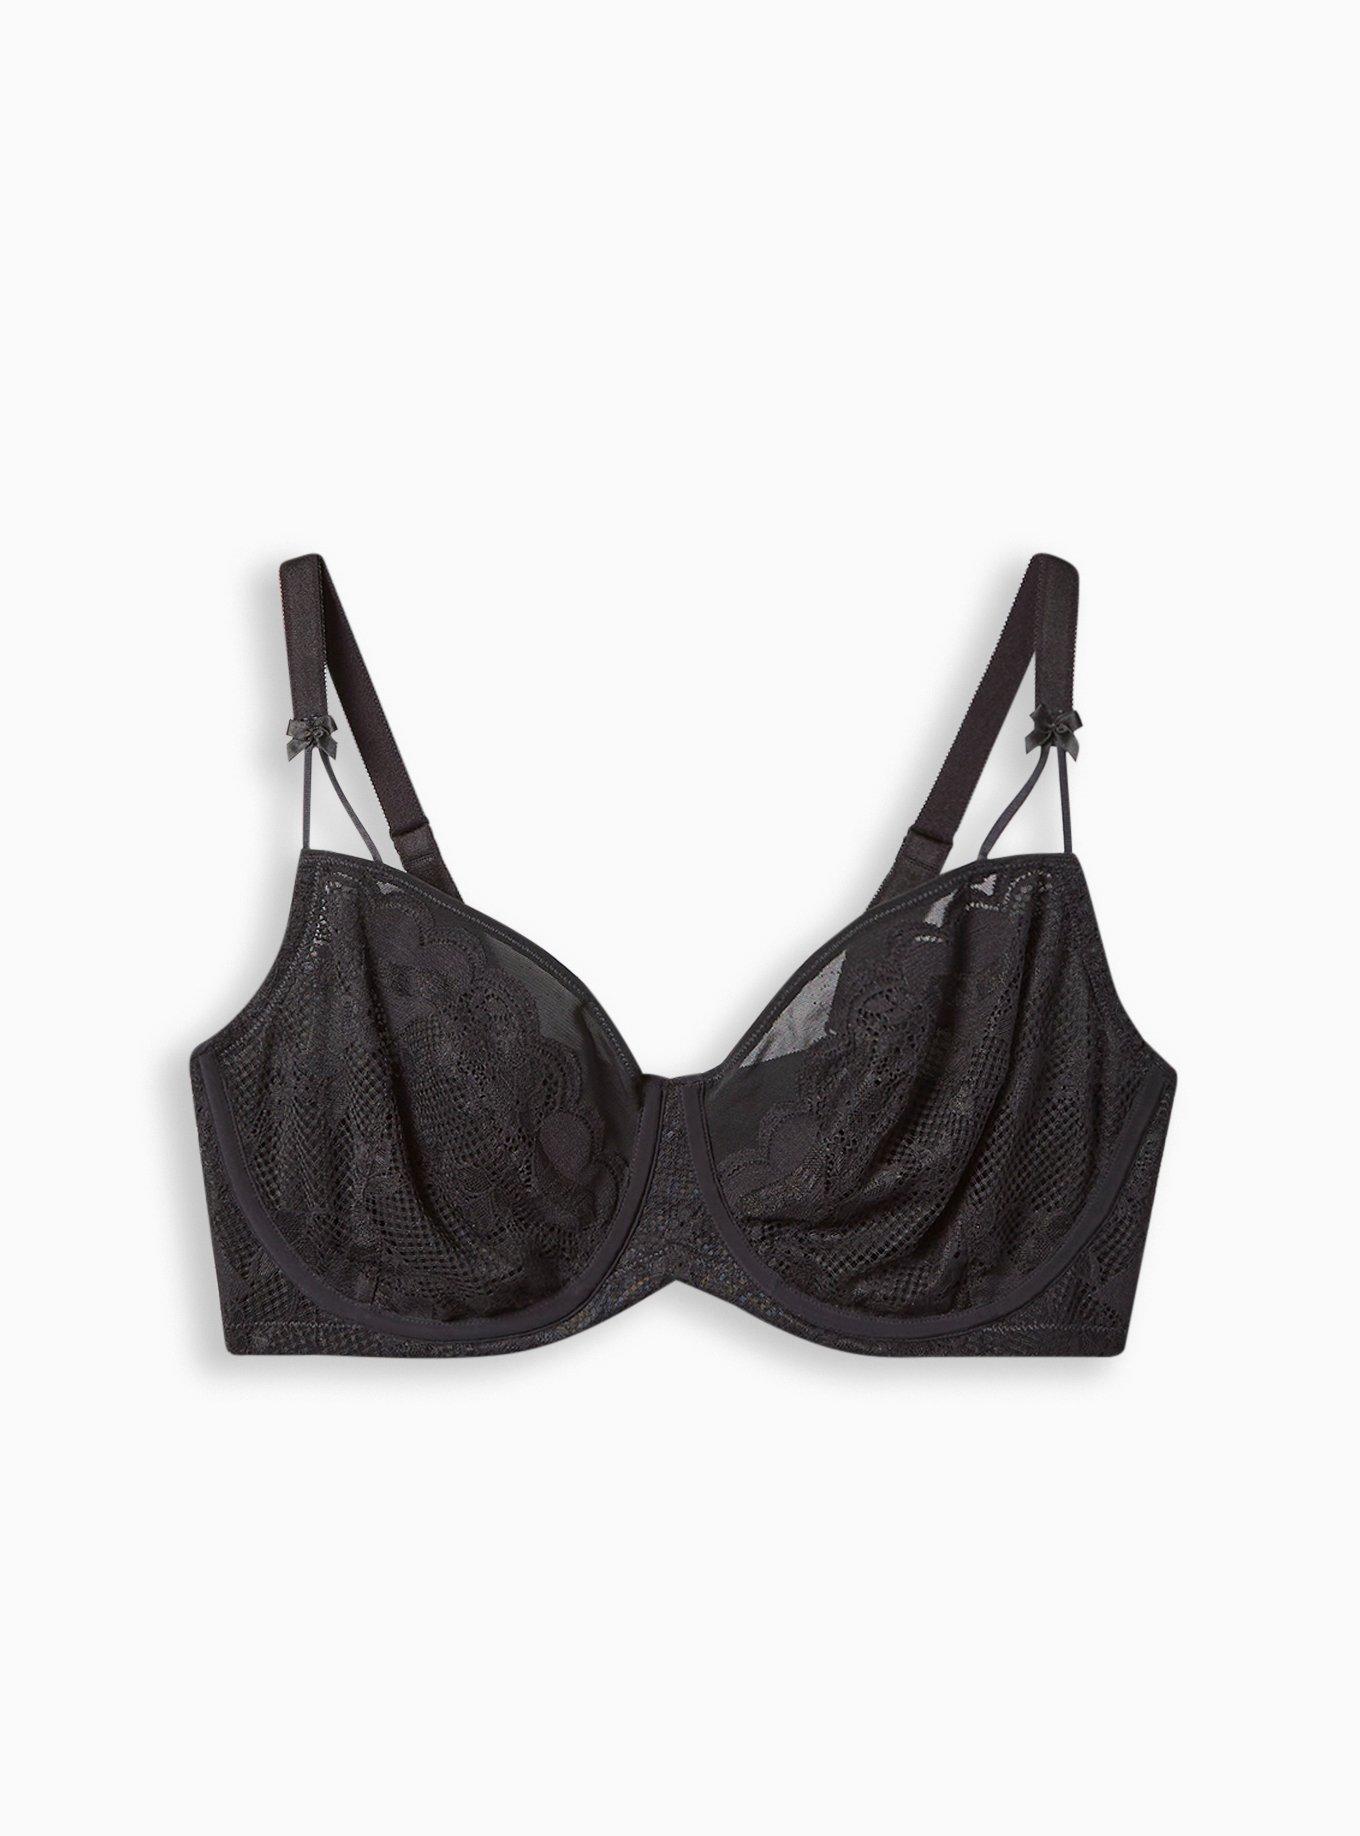 Nasty Gal Word on the Street Bralette and Panty Set